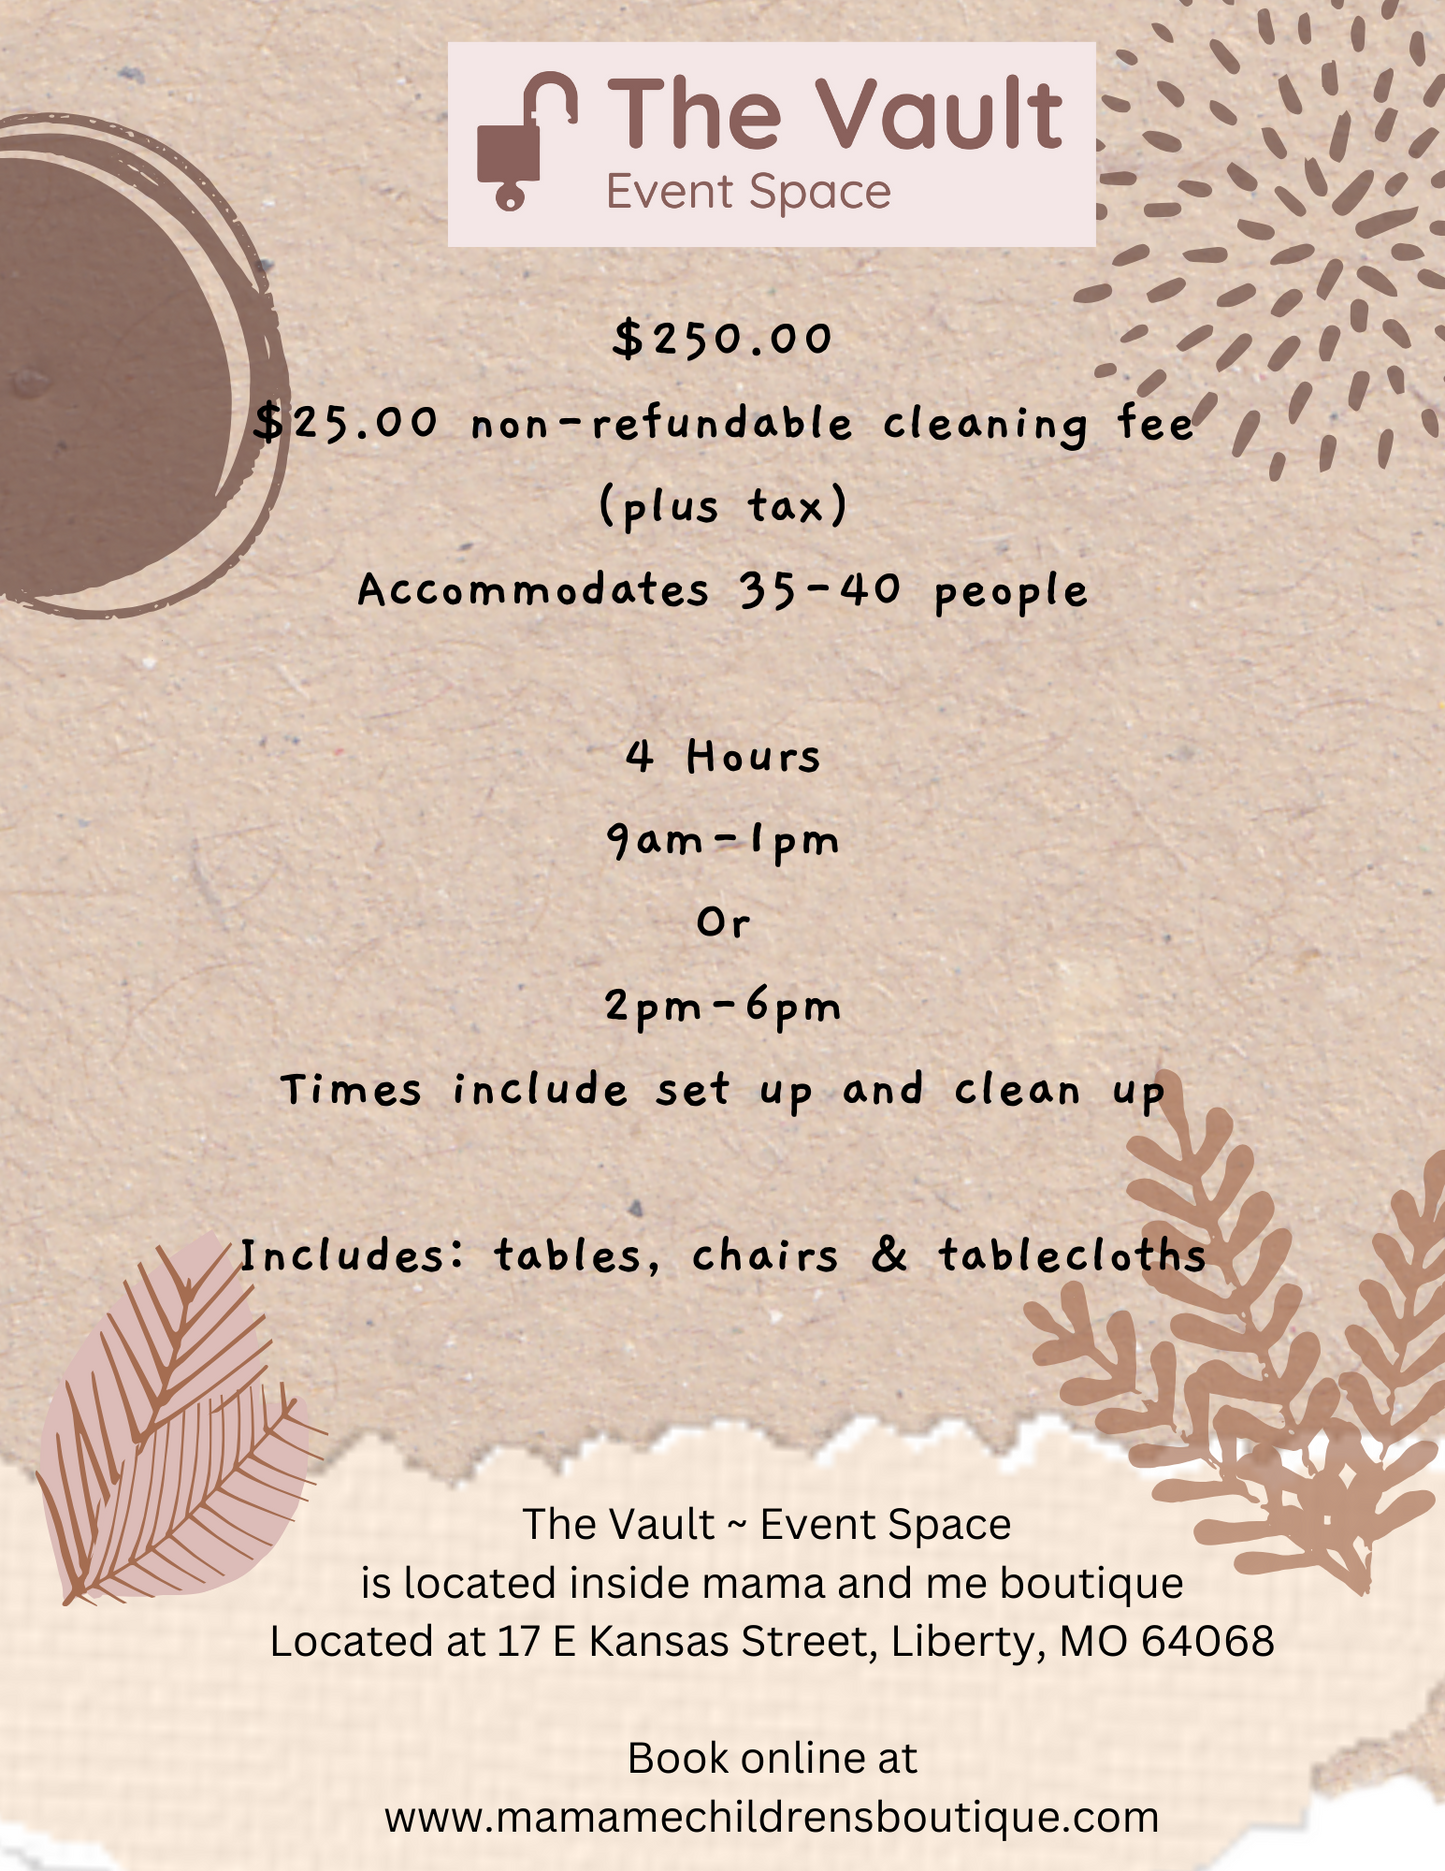 The Vault ~ Event Space (4 Hours, 35-40 Guests)